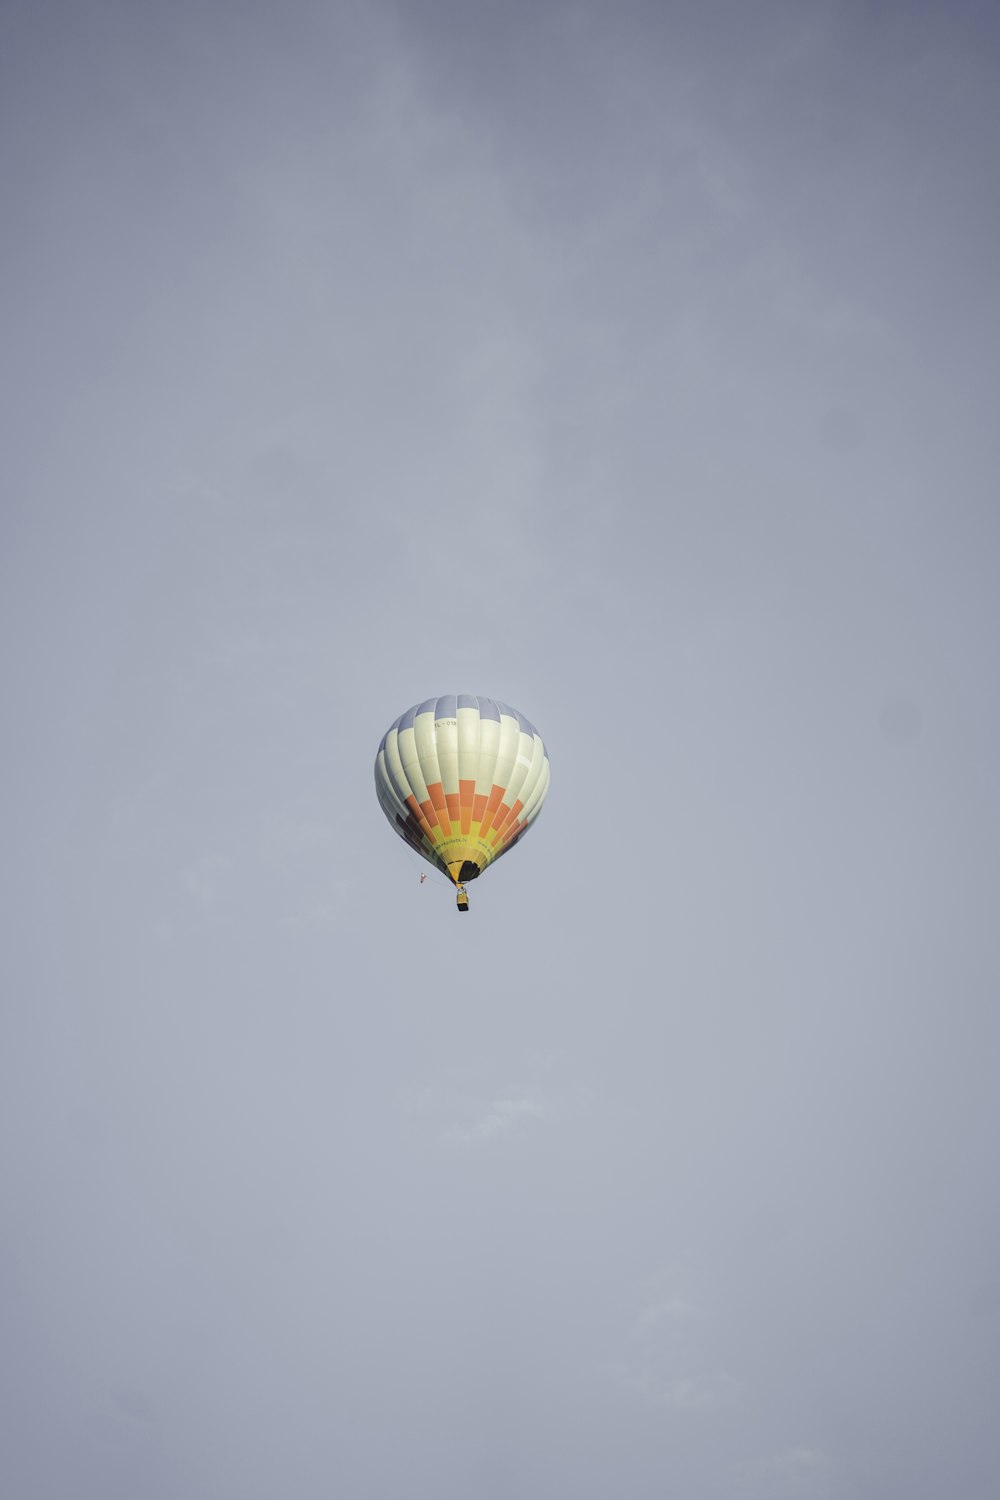 red yellow and blue hot air balloon in the sky